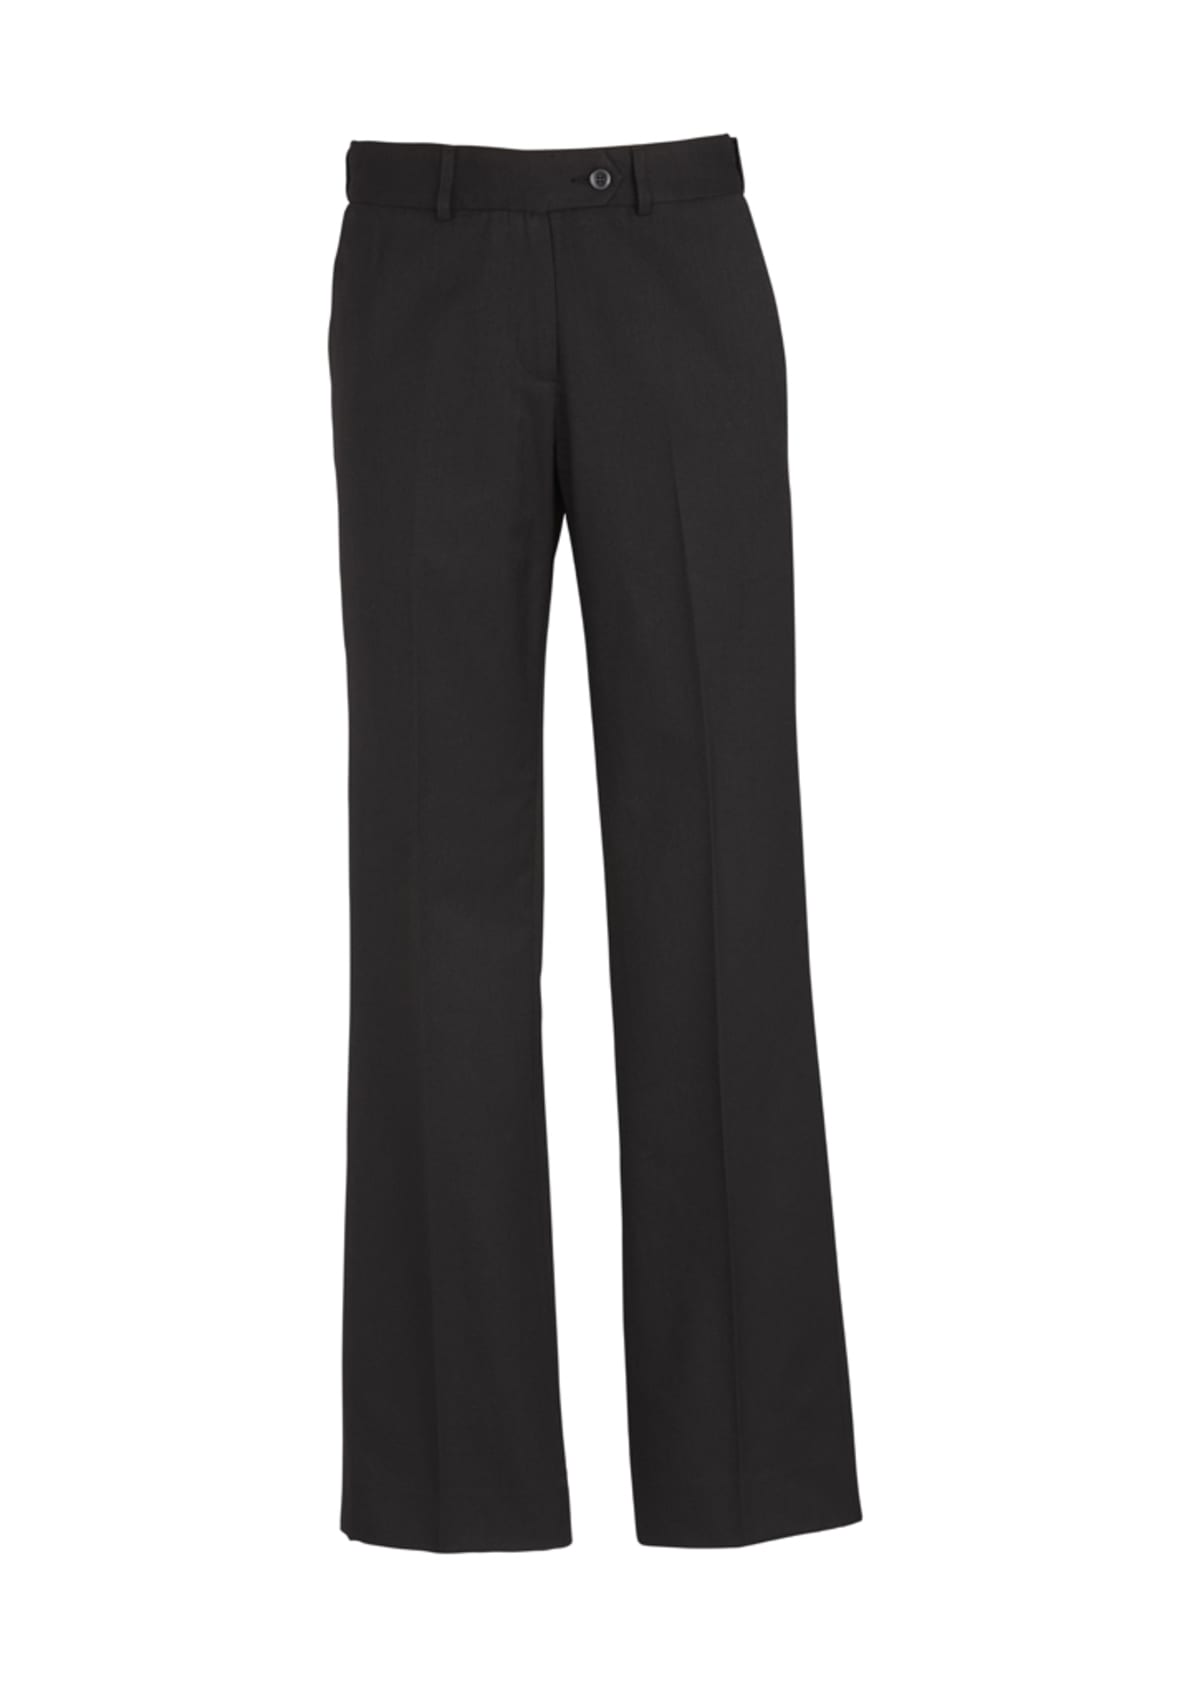 Cool Stretch Womens Adjustable Waist Pant